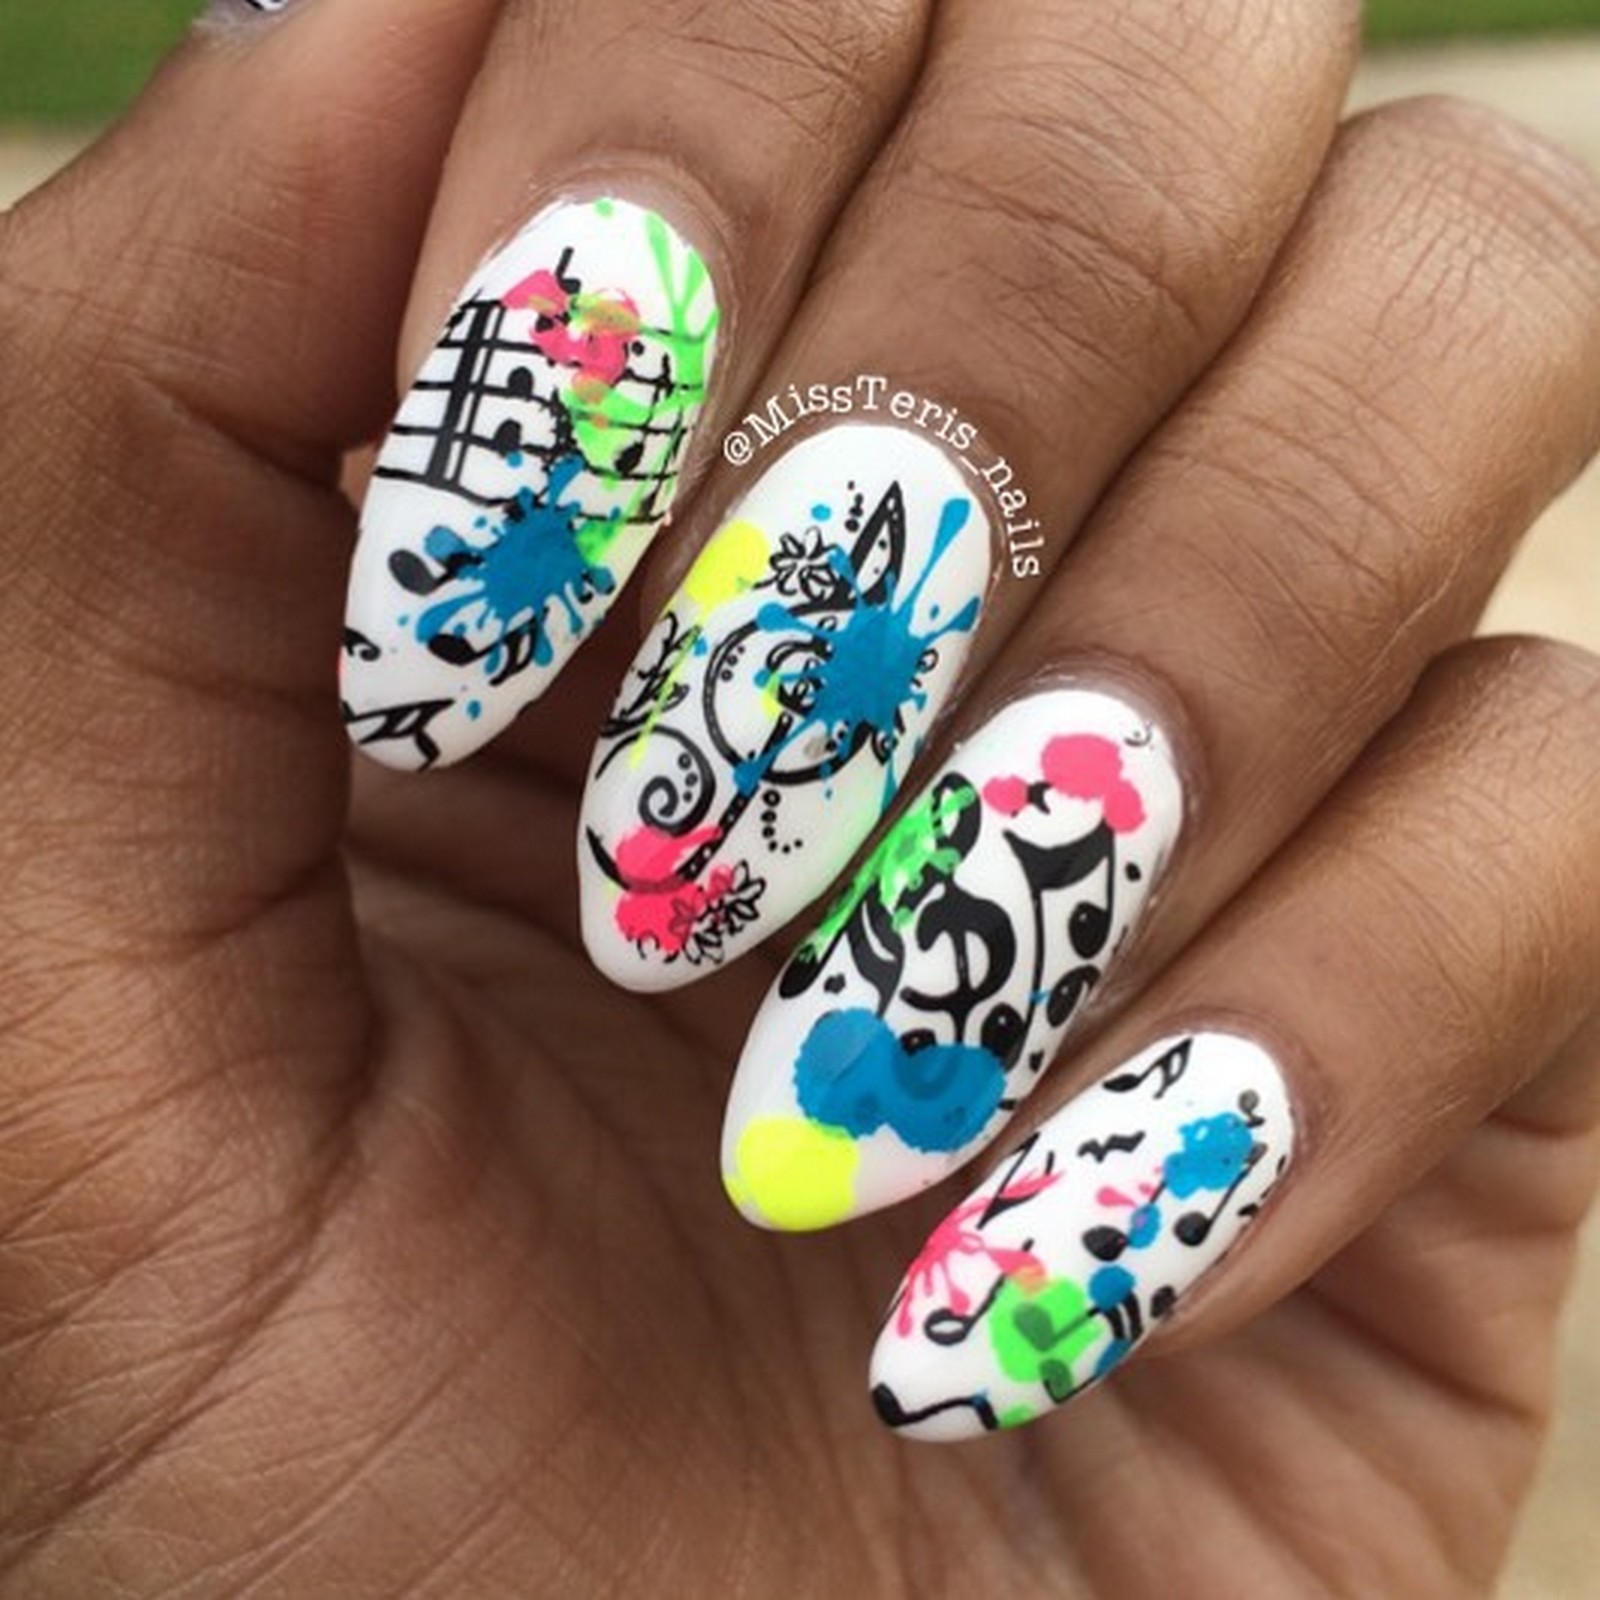 18 Music Nails and Nail Art Designs That Will Make You Want to Sing!